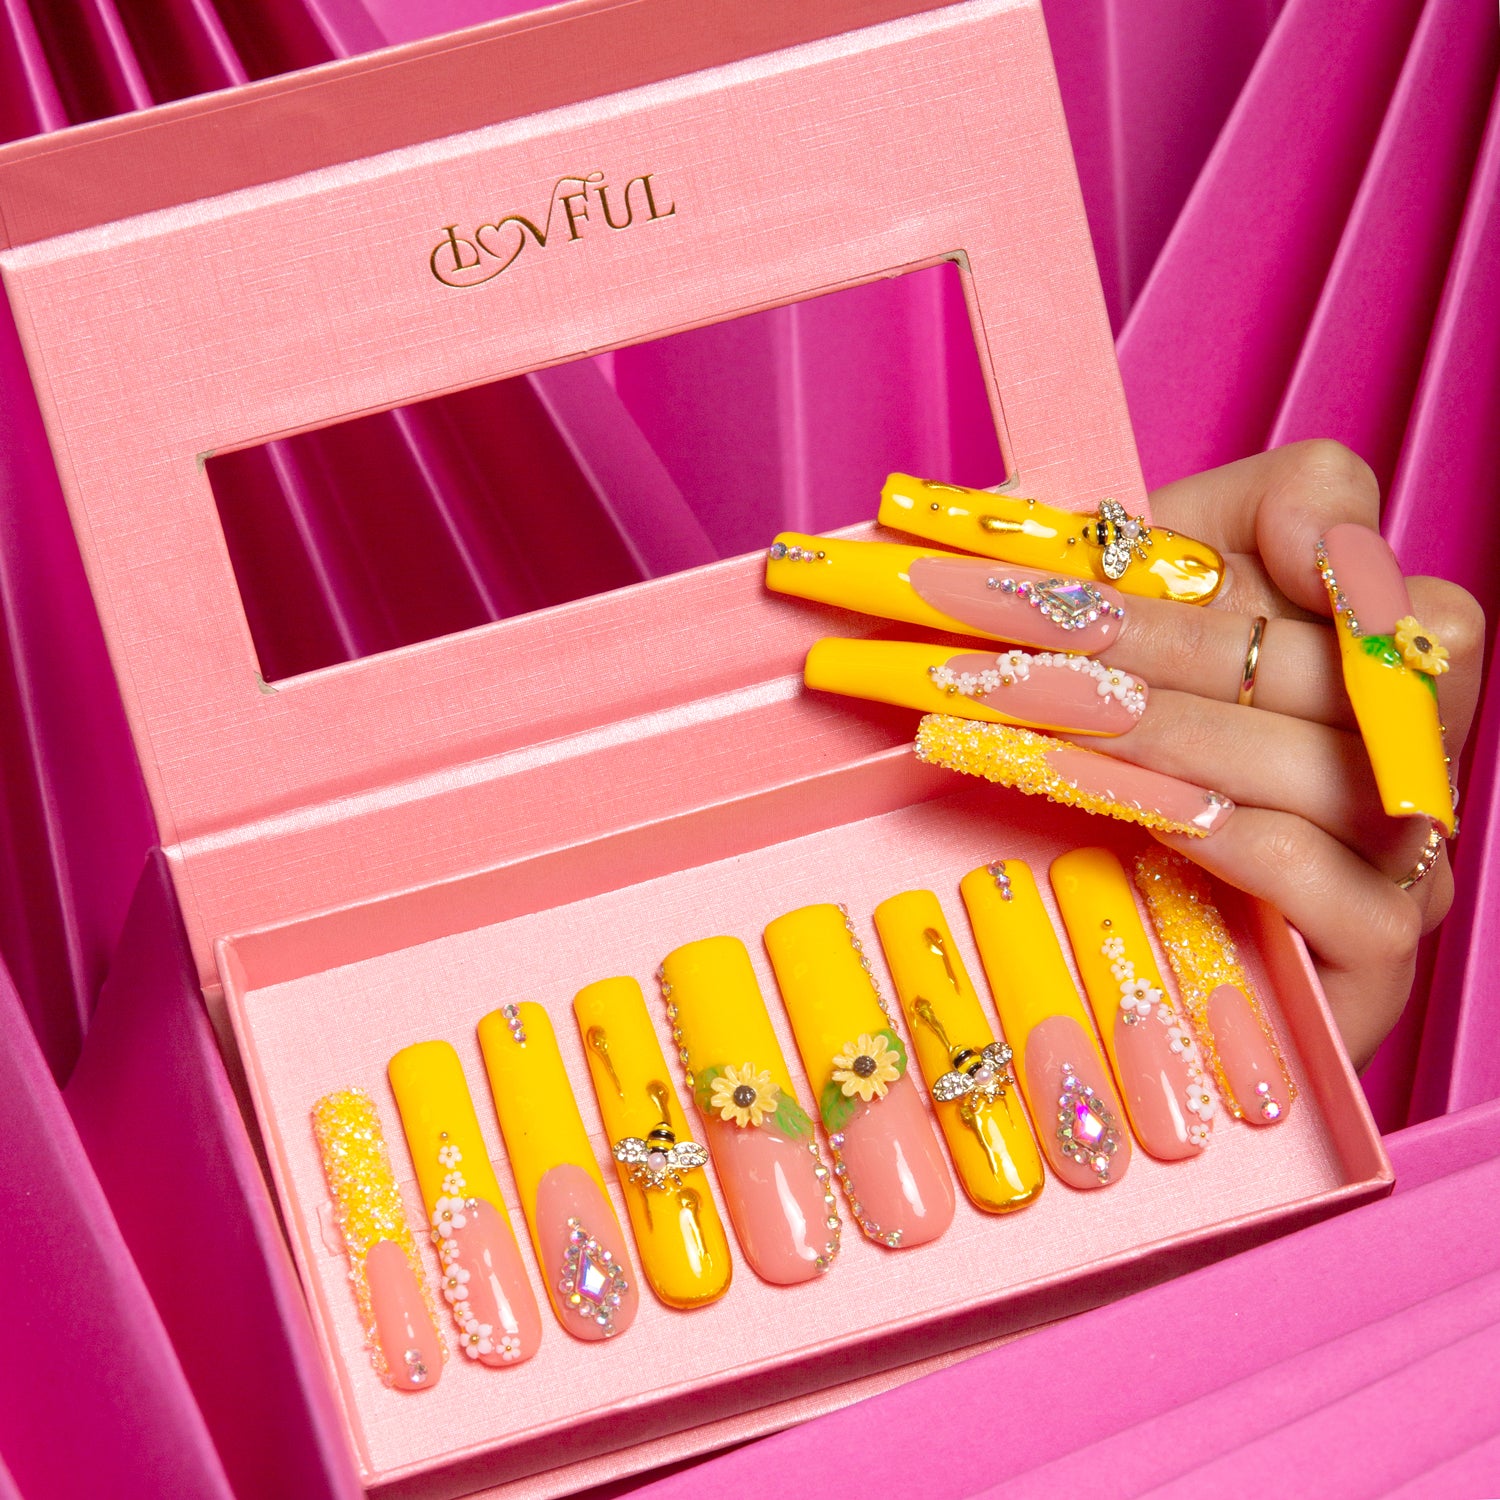 Yellow press-on acrylic nails with sunflower patterns and bee accents displayed in a pink Lovful box. Hand with matching nails holding the box.